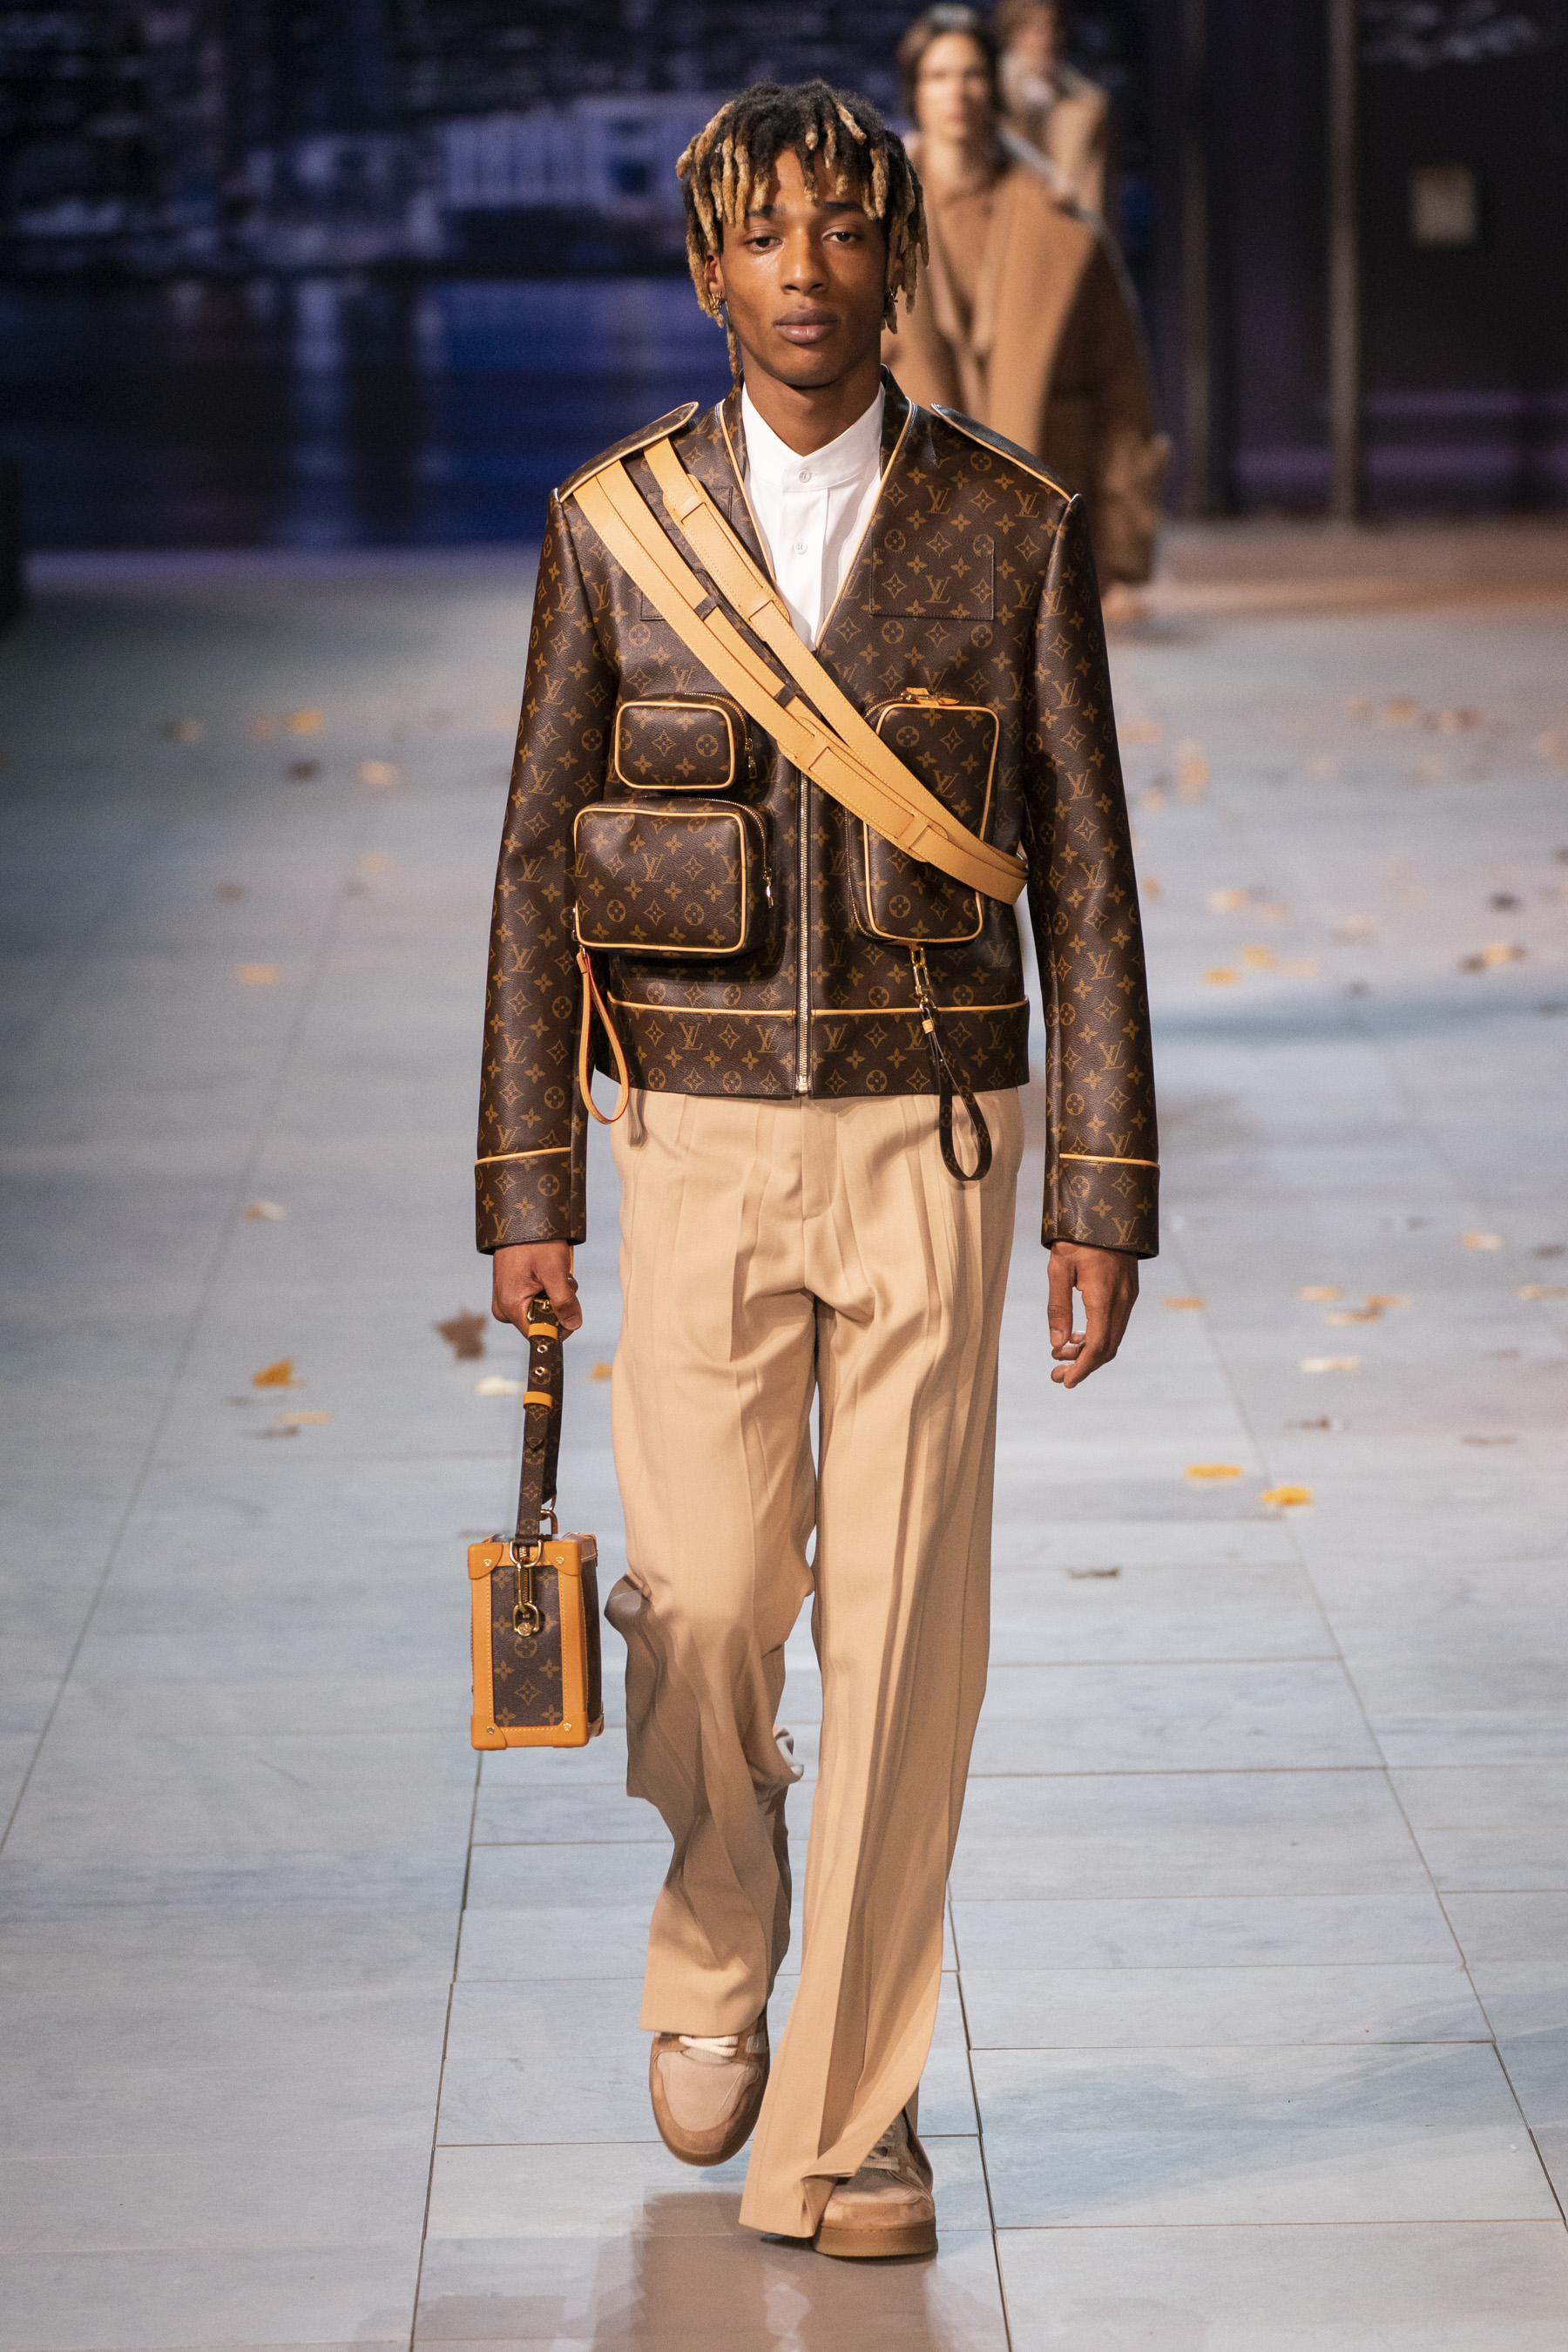 Top 10 Fall 2019 Men's Fashion Shows | The Impression